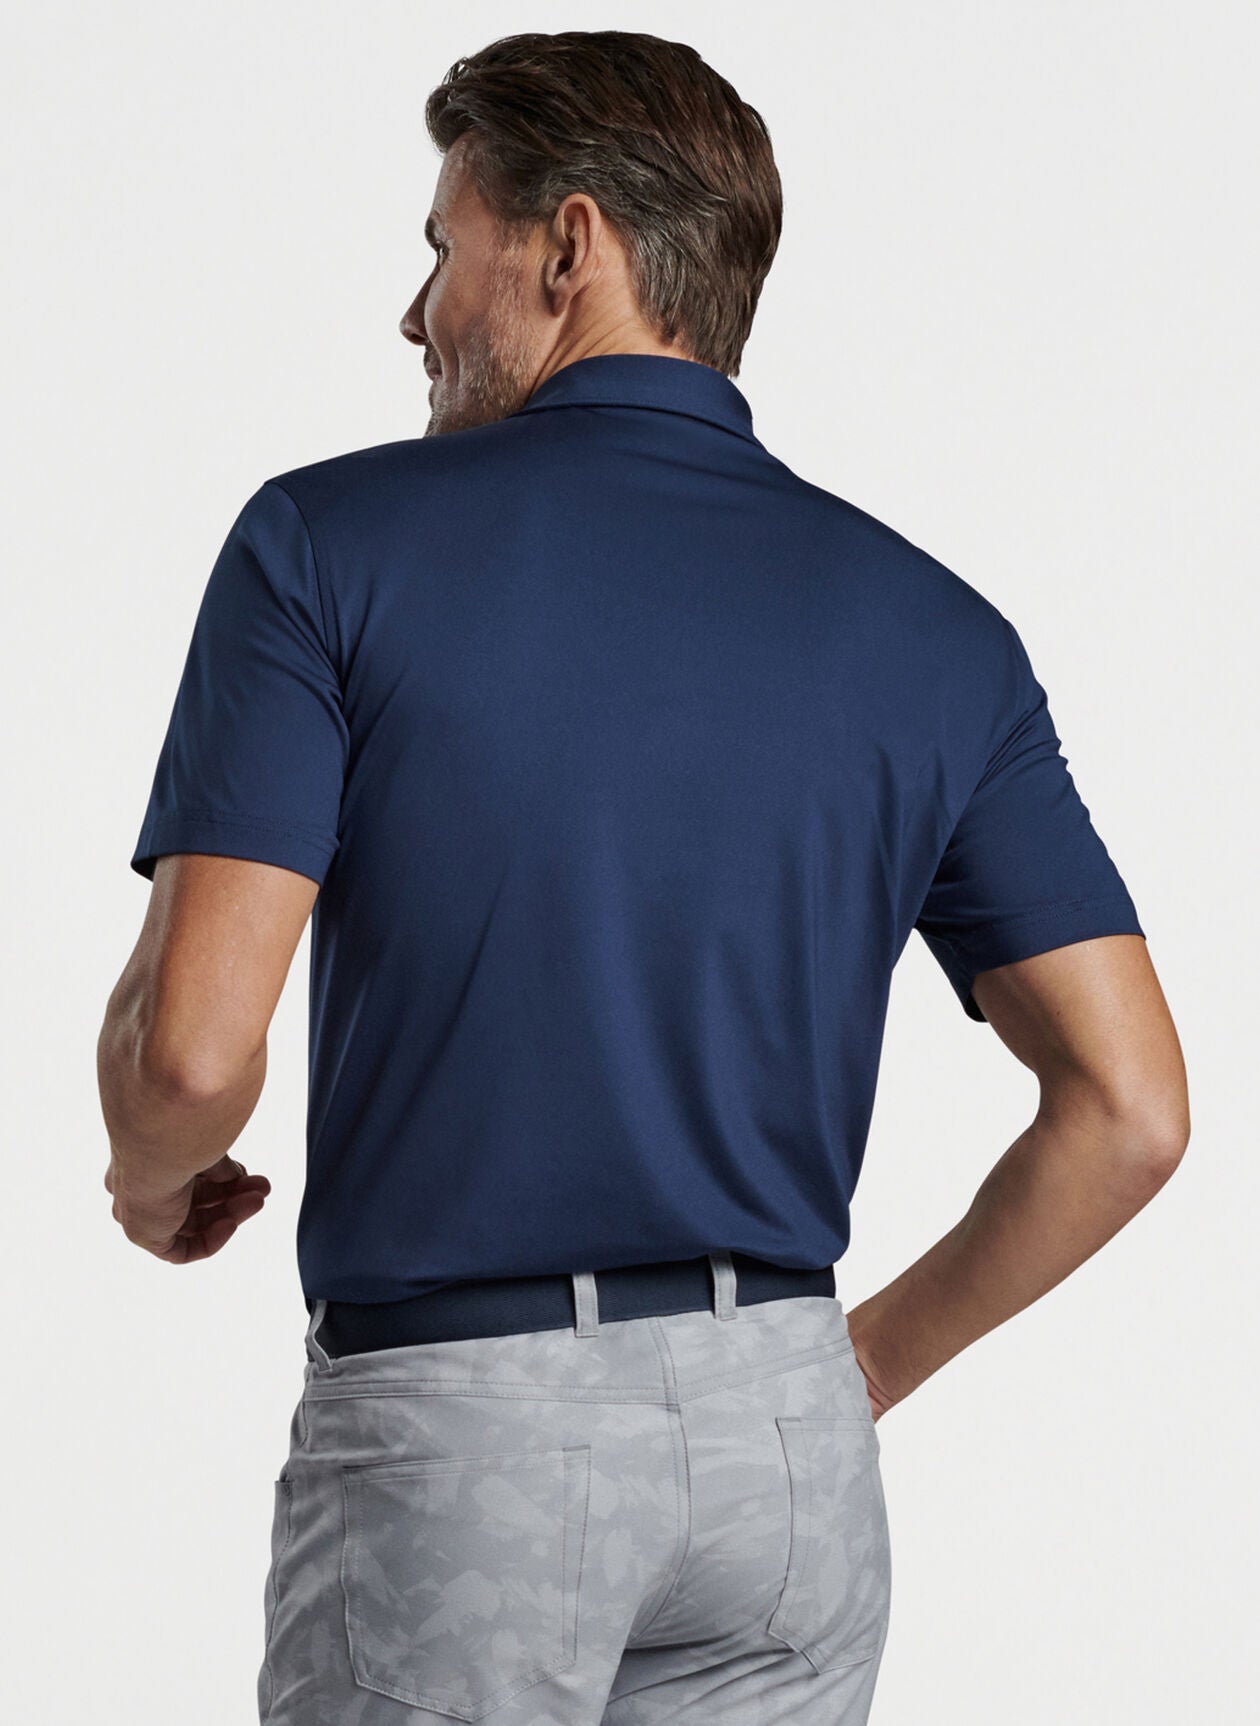 Peter Millar Solid Performance Jersey Polo - Navy